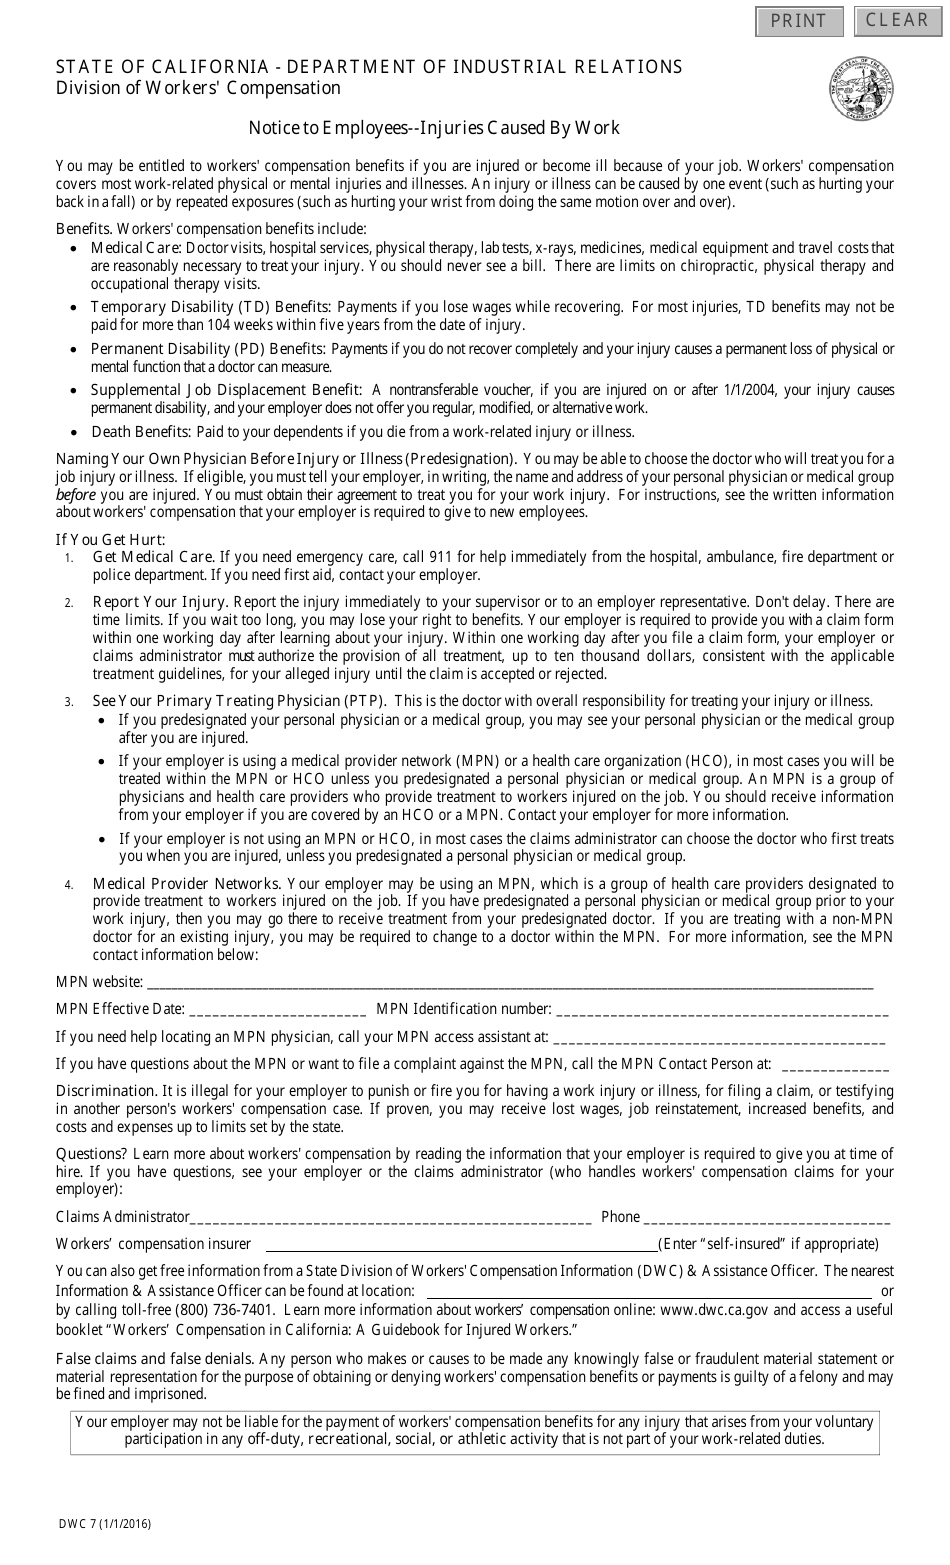 DWC Form 7 Notice to Employees - Injuries Caused by Work - California (English / Spanish), Page 1